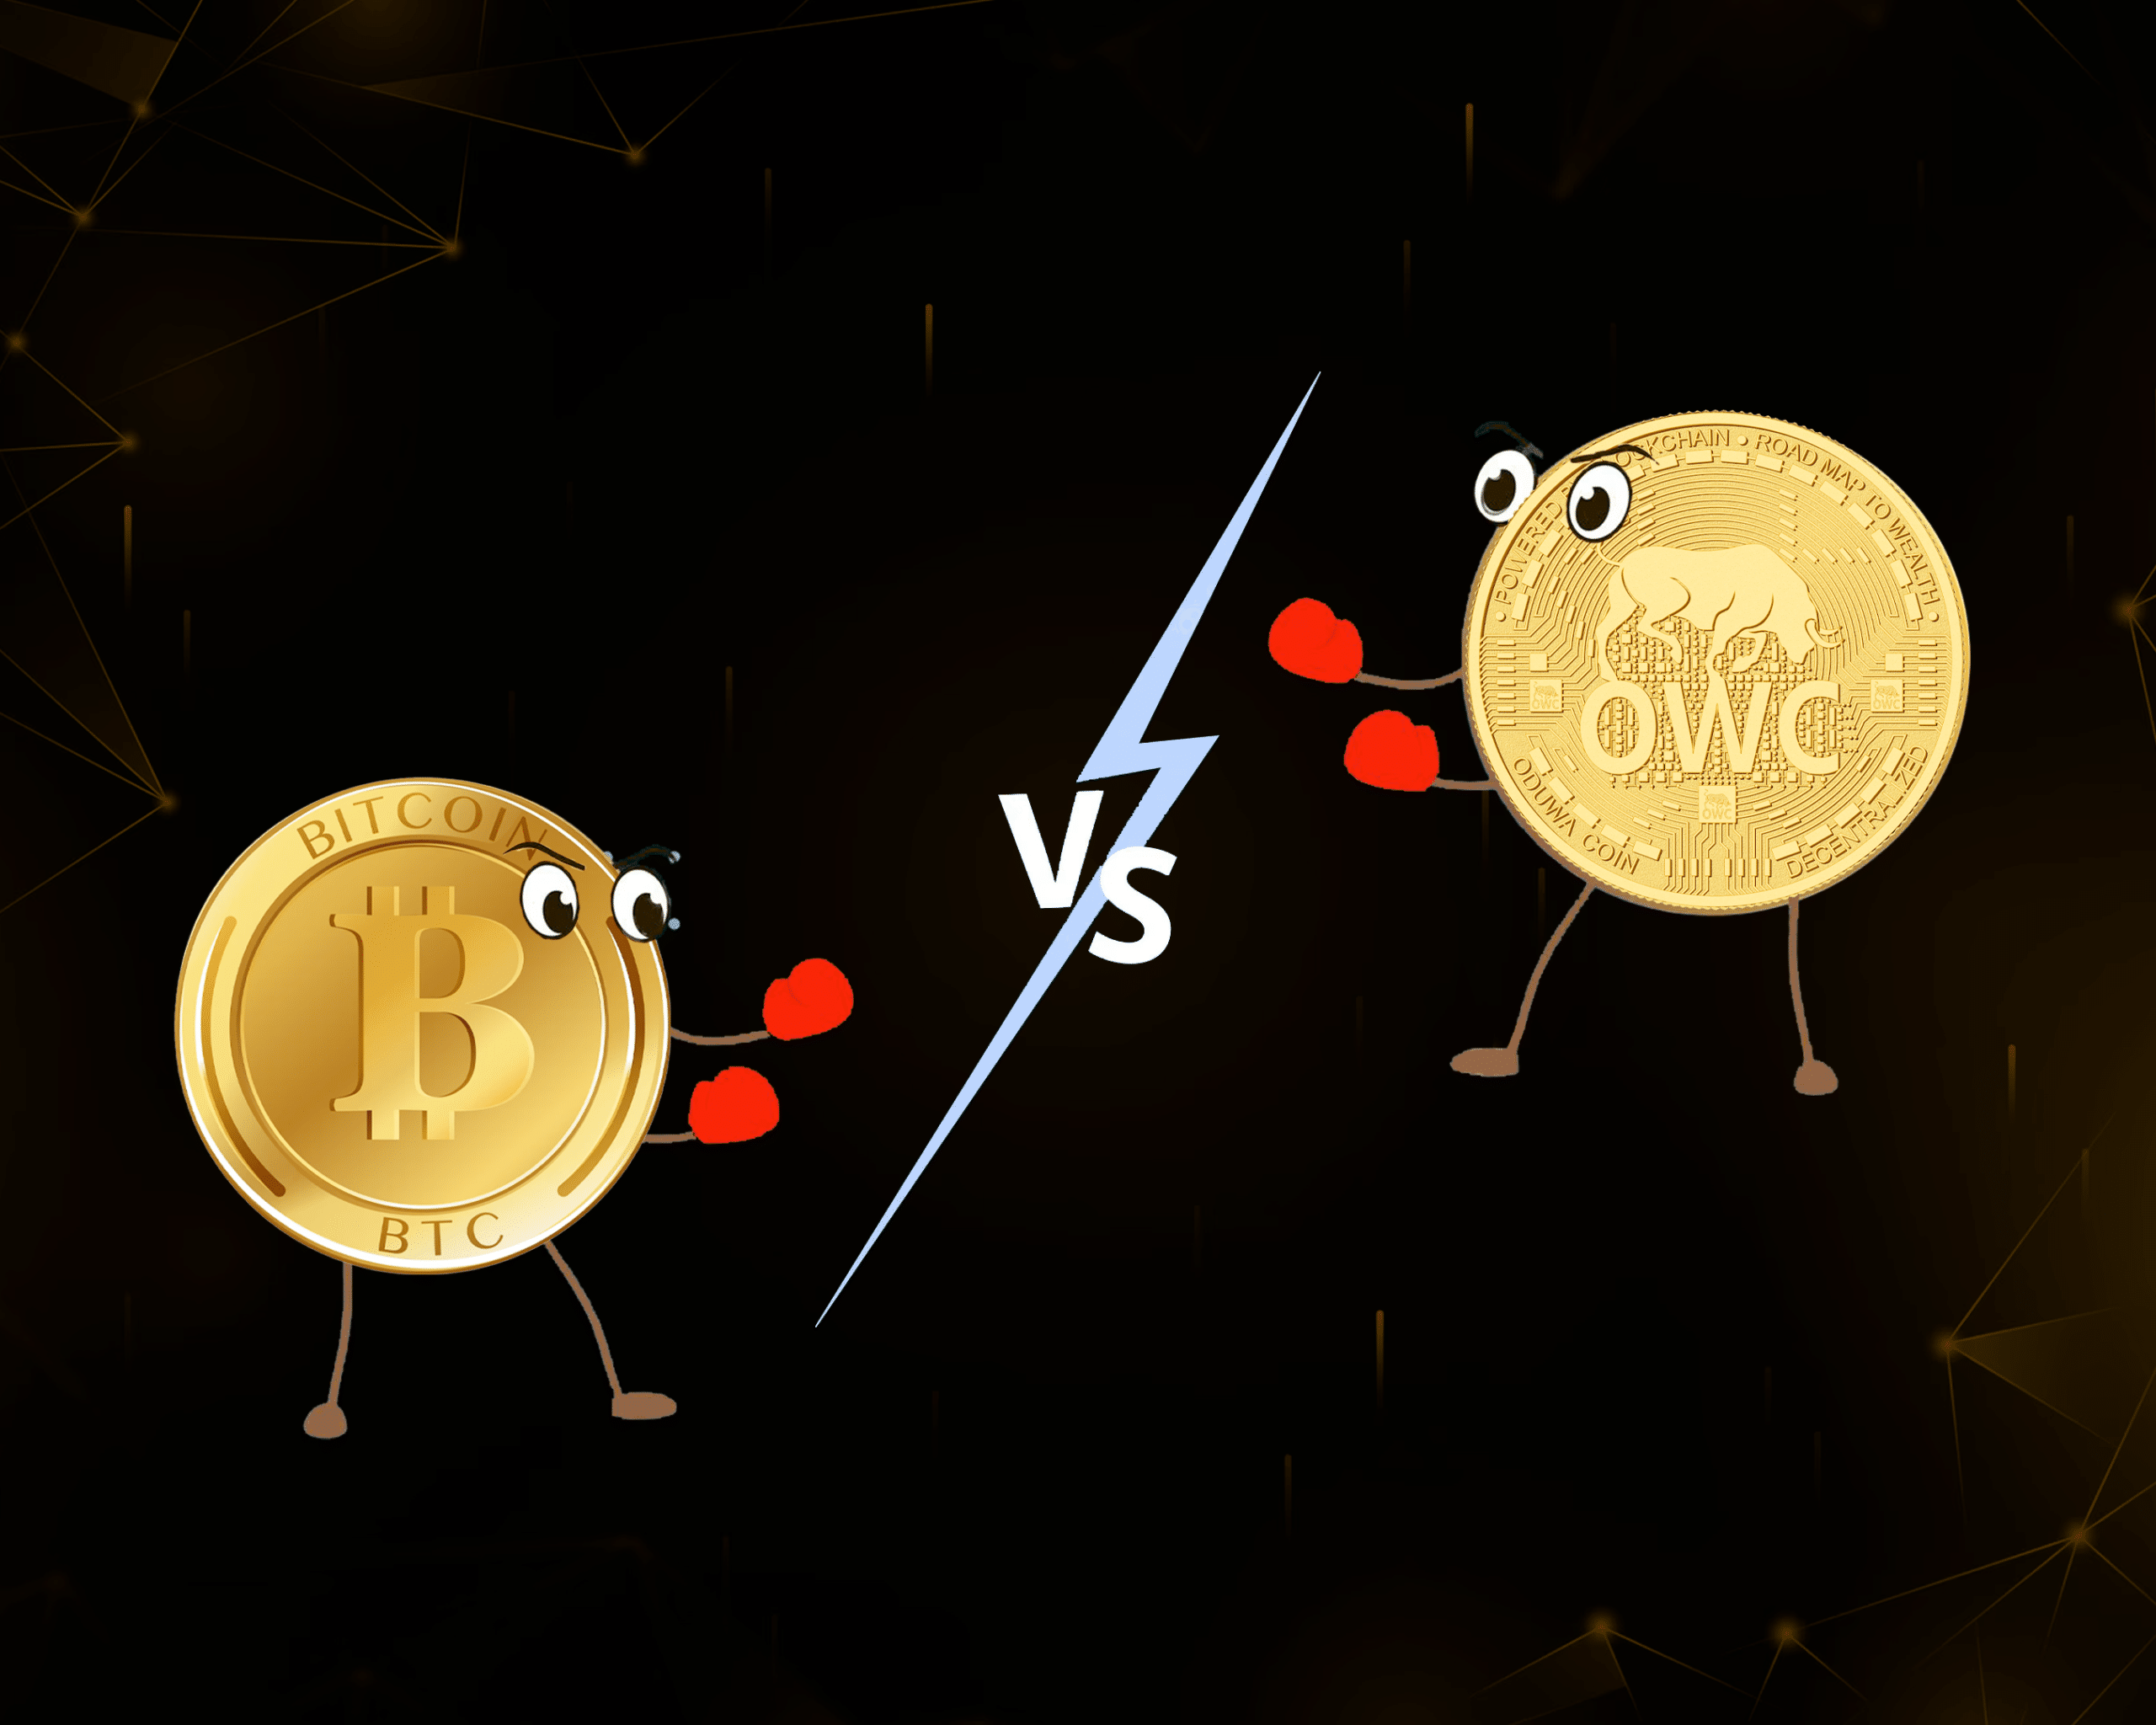 Mining vs Staking: A Comparative Analysis of Bitcoin And Oduwacoin